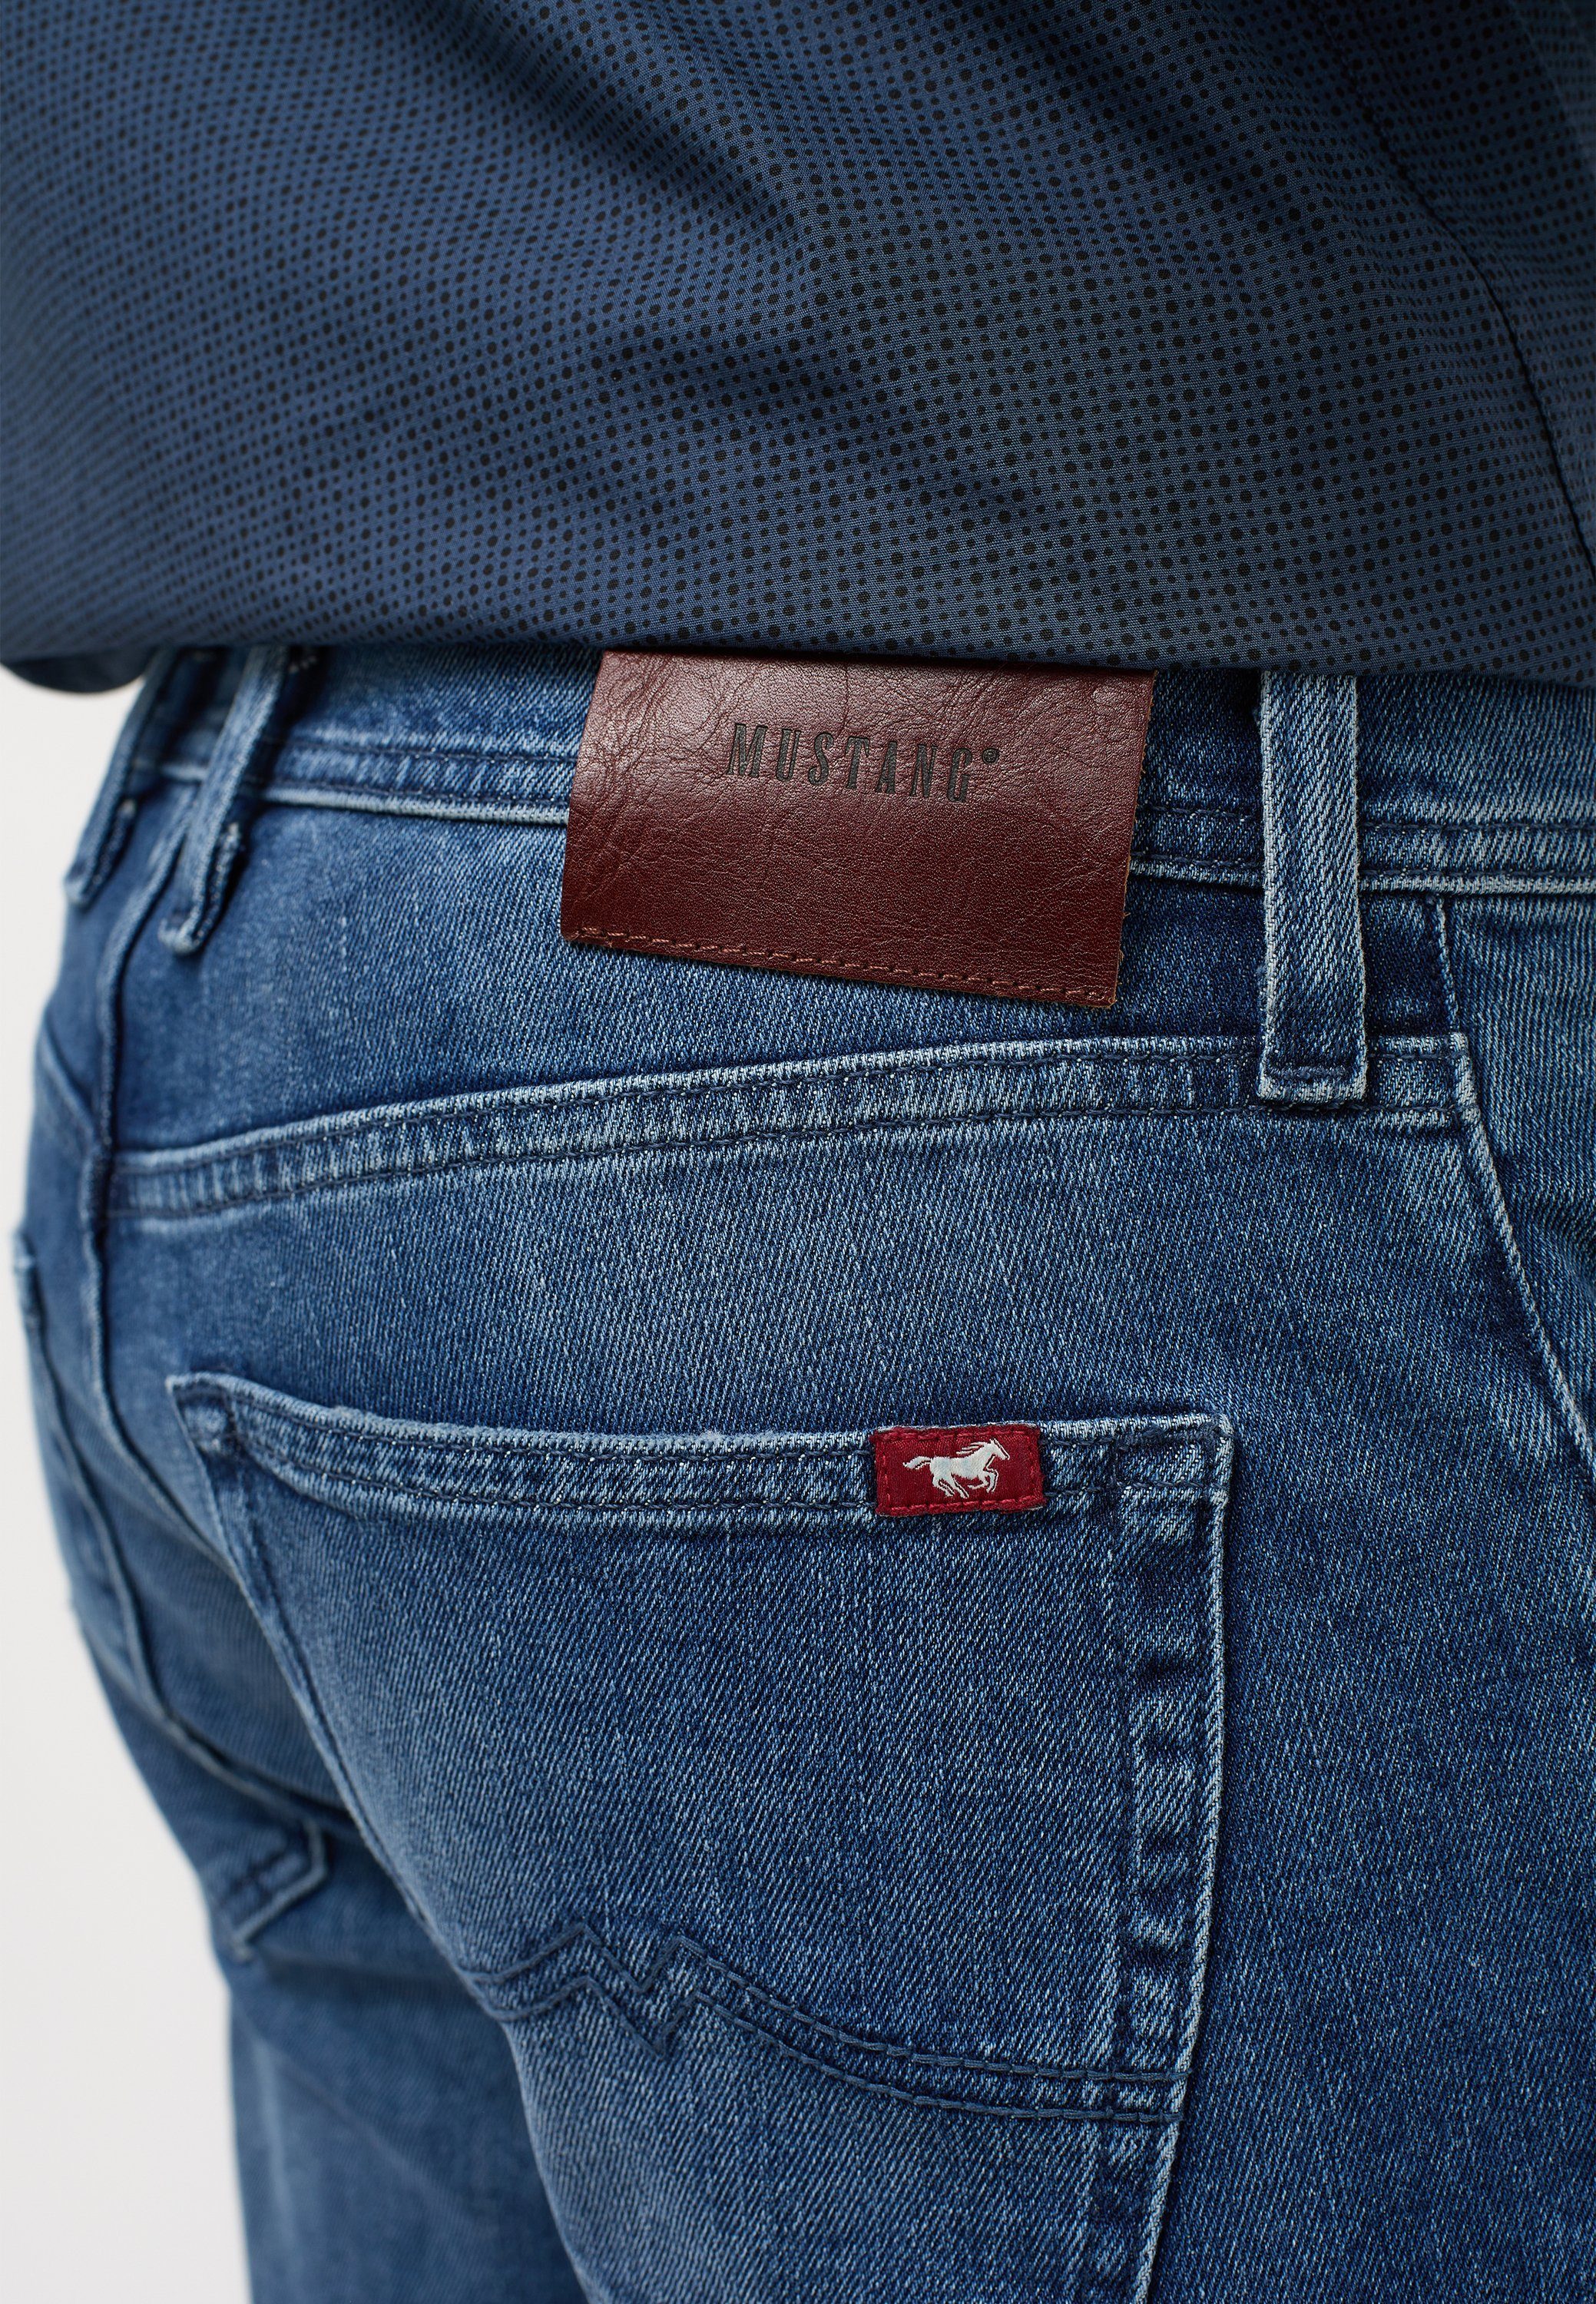 Mustang Straight jeans Style Denver Straight